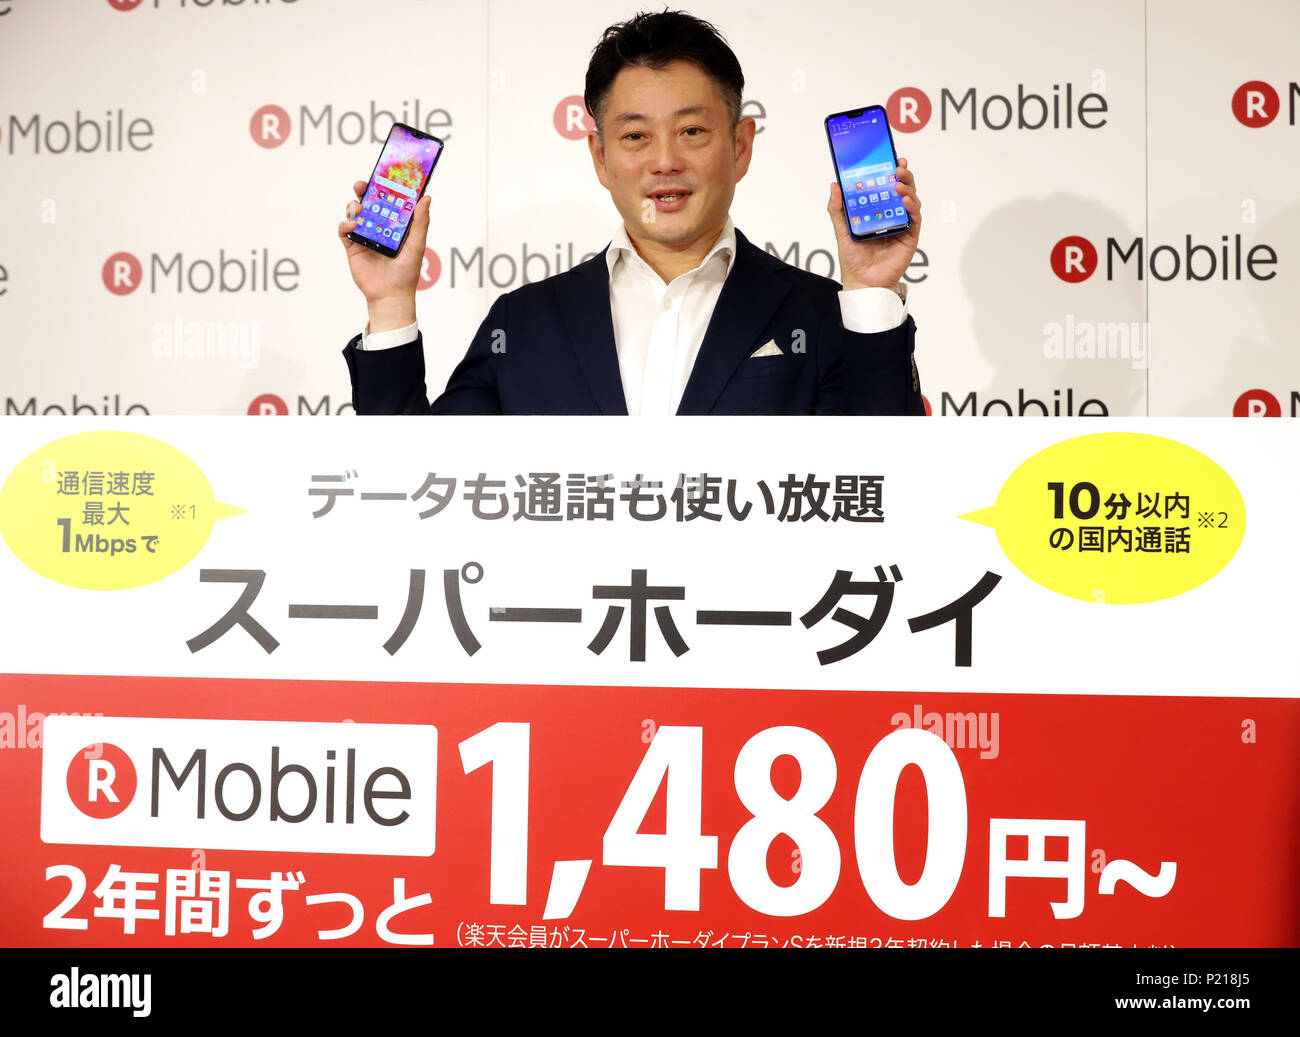 Tokyo, Japan. 14th June, 2018. Japan's online commerce giant Rakuten's mobile business operating manager Hiroto Ooka displays Huawei's latest smart phone P20 as the company announce the new price plan for their MVNO service at the Rakuten headquarters in Tokyo on Thursday, June 14, 2018. Credit: Yoshio Tsunoda/AFLO/Alamy Live News Stock Photo